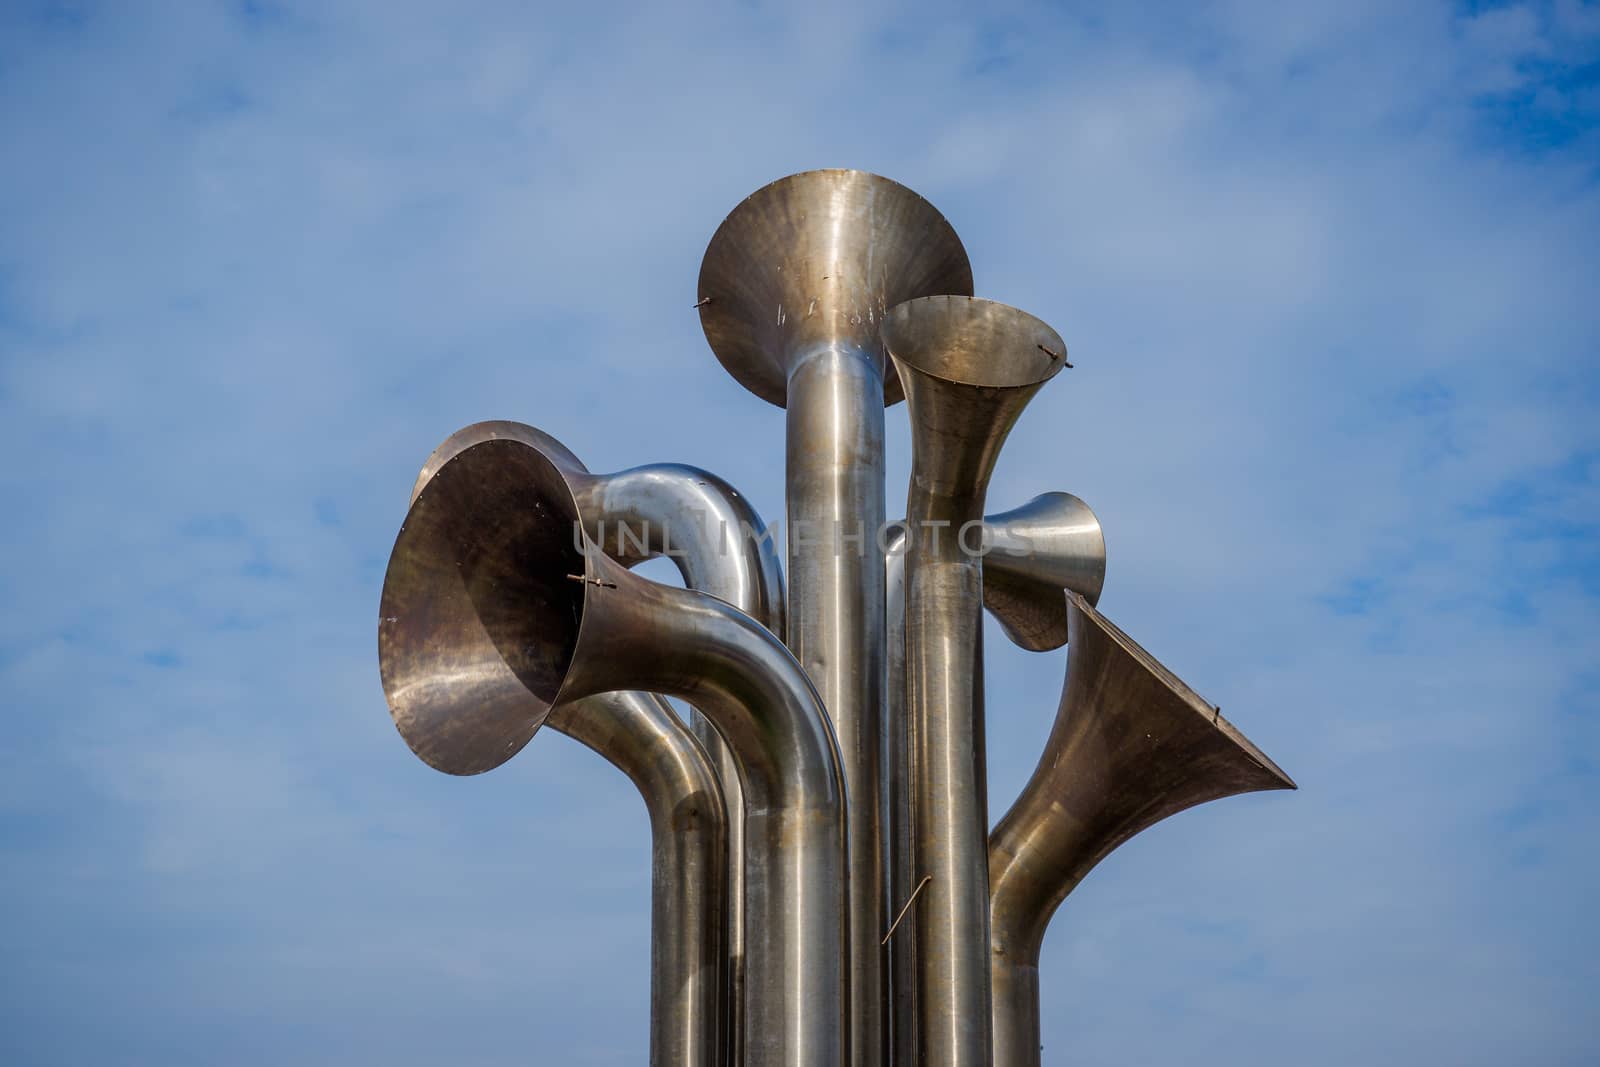 a number of polished steel trumpet shapes made into a sculpture by paddythegolfer